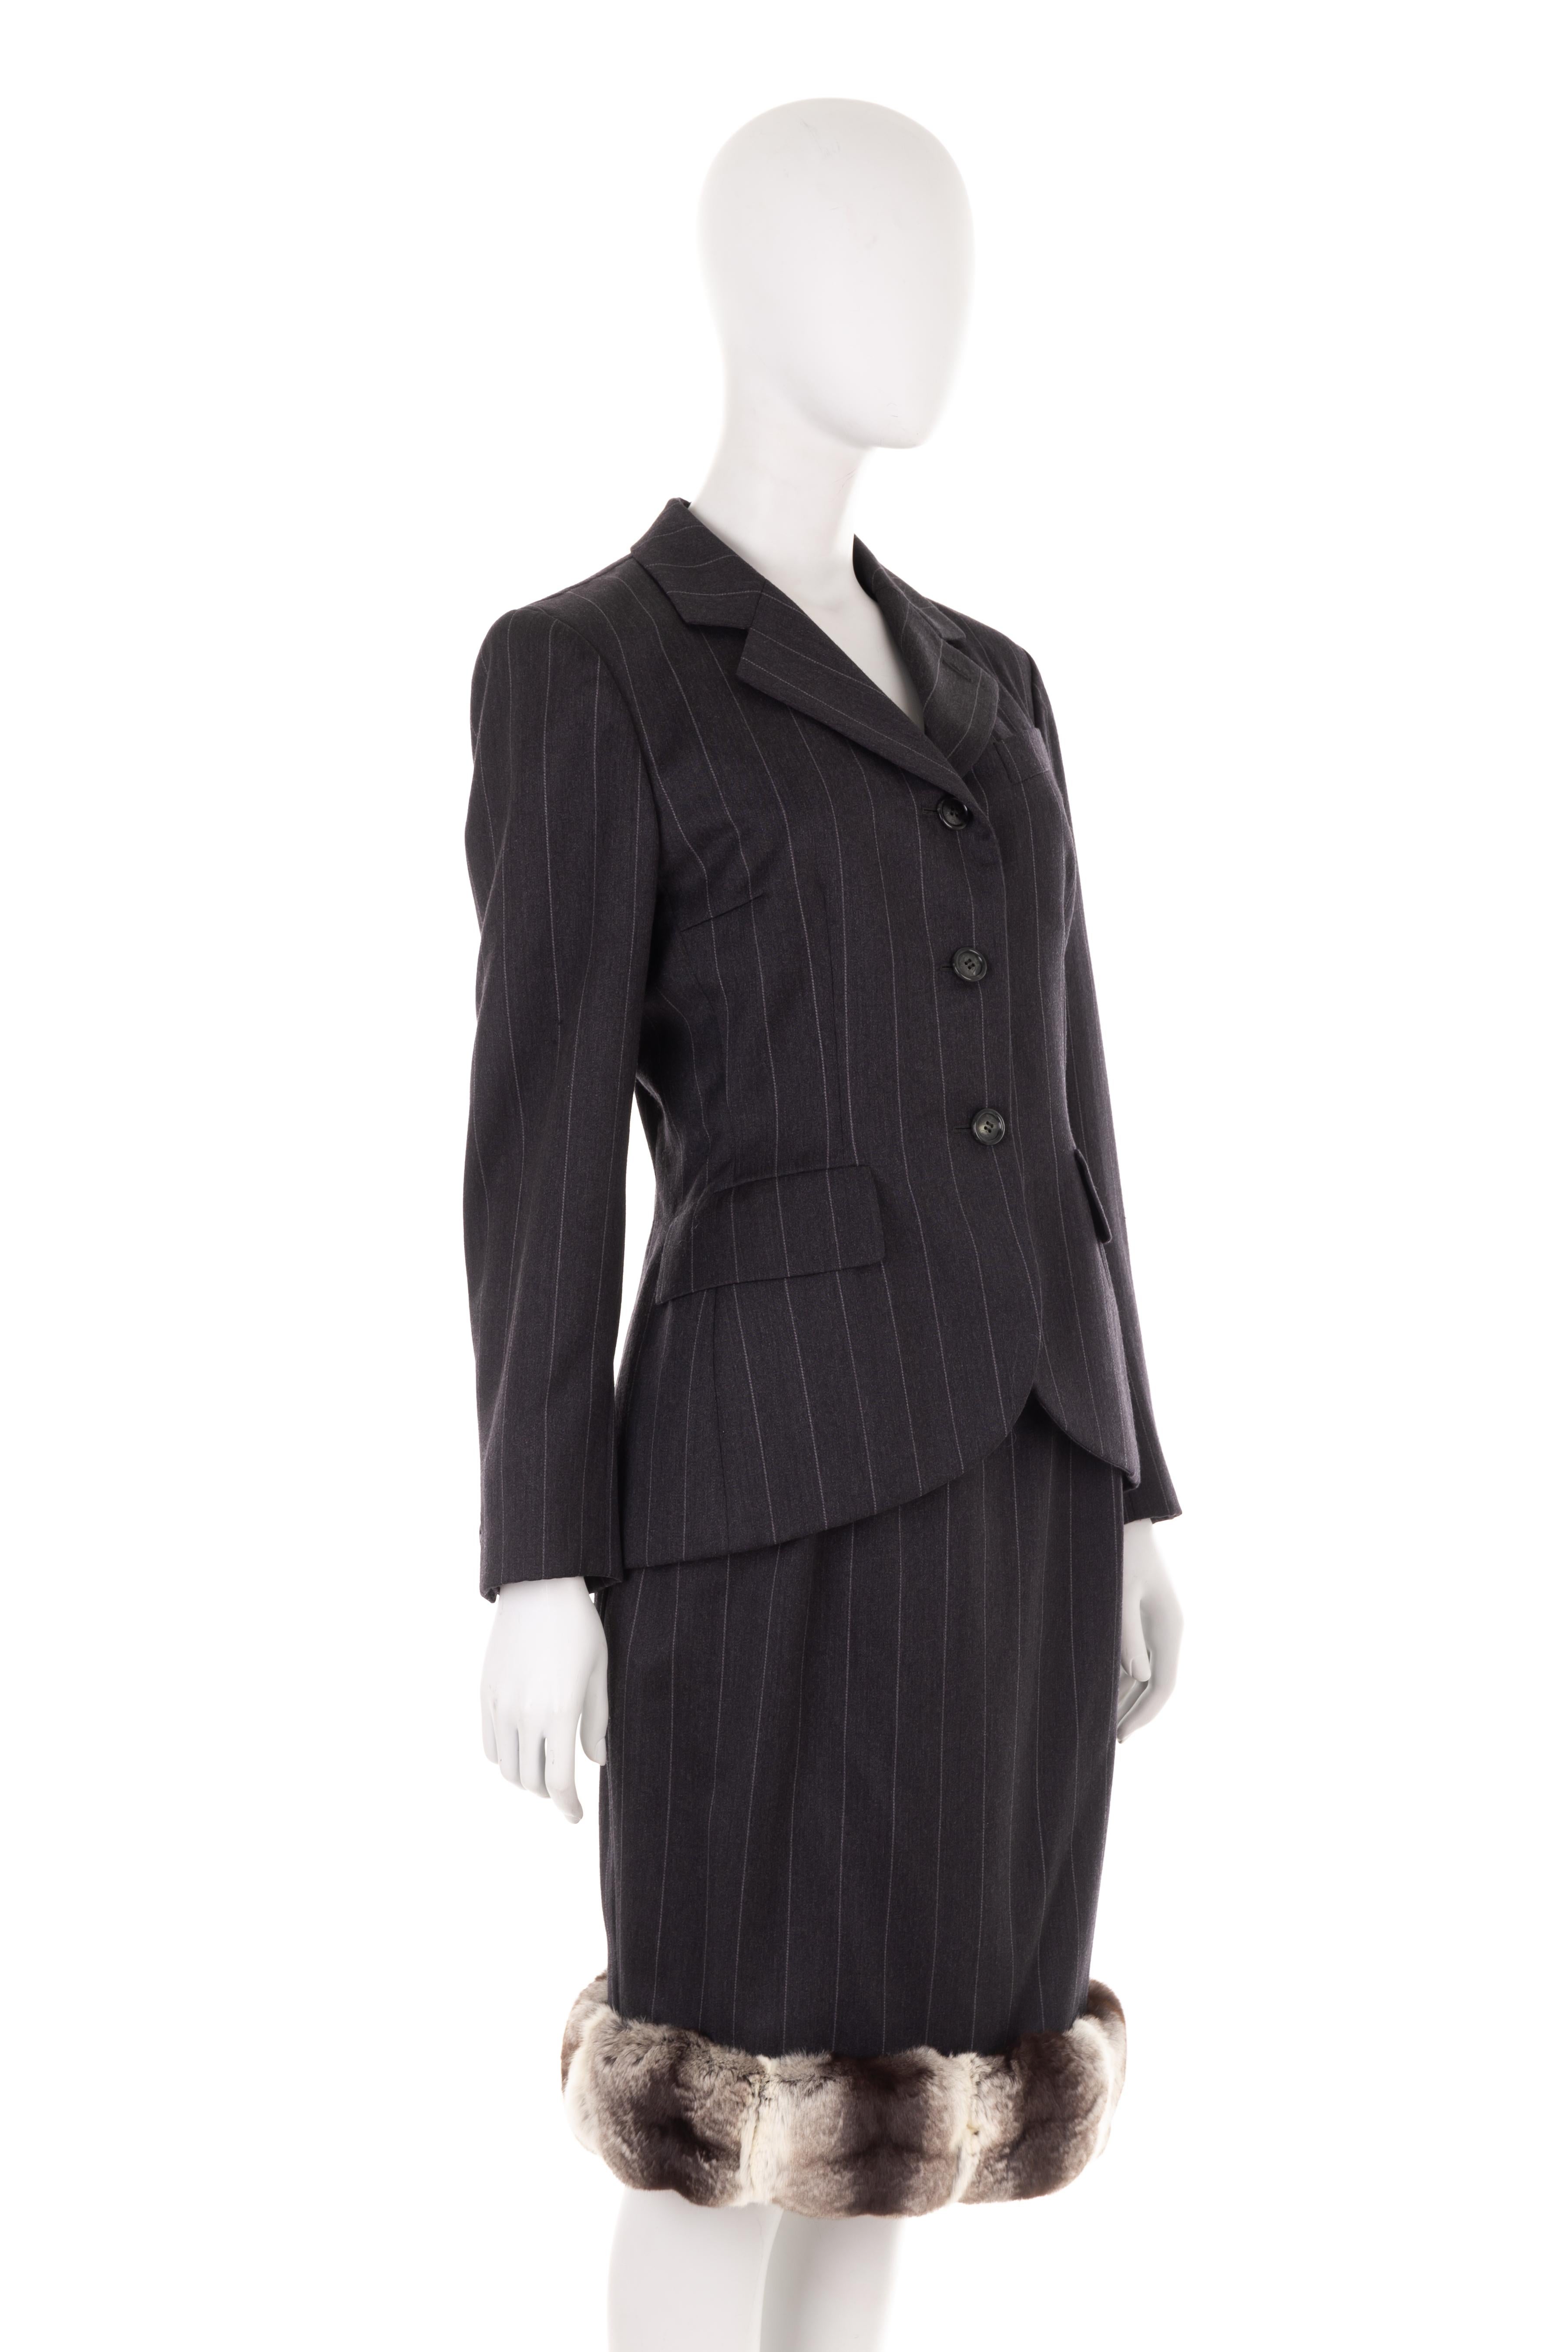 - Christian Dior by Marc Bohan
- Fall Winter 1987 collection
- Grey wool pinstripe jacket and skirt suit
- Form-fitting hourglass tailored jacket
- Wide notch lapels
- Front flap pockets
- Front horn buttons
- Midi pinstripe skirt 
- Brown